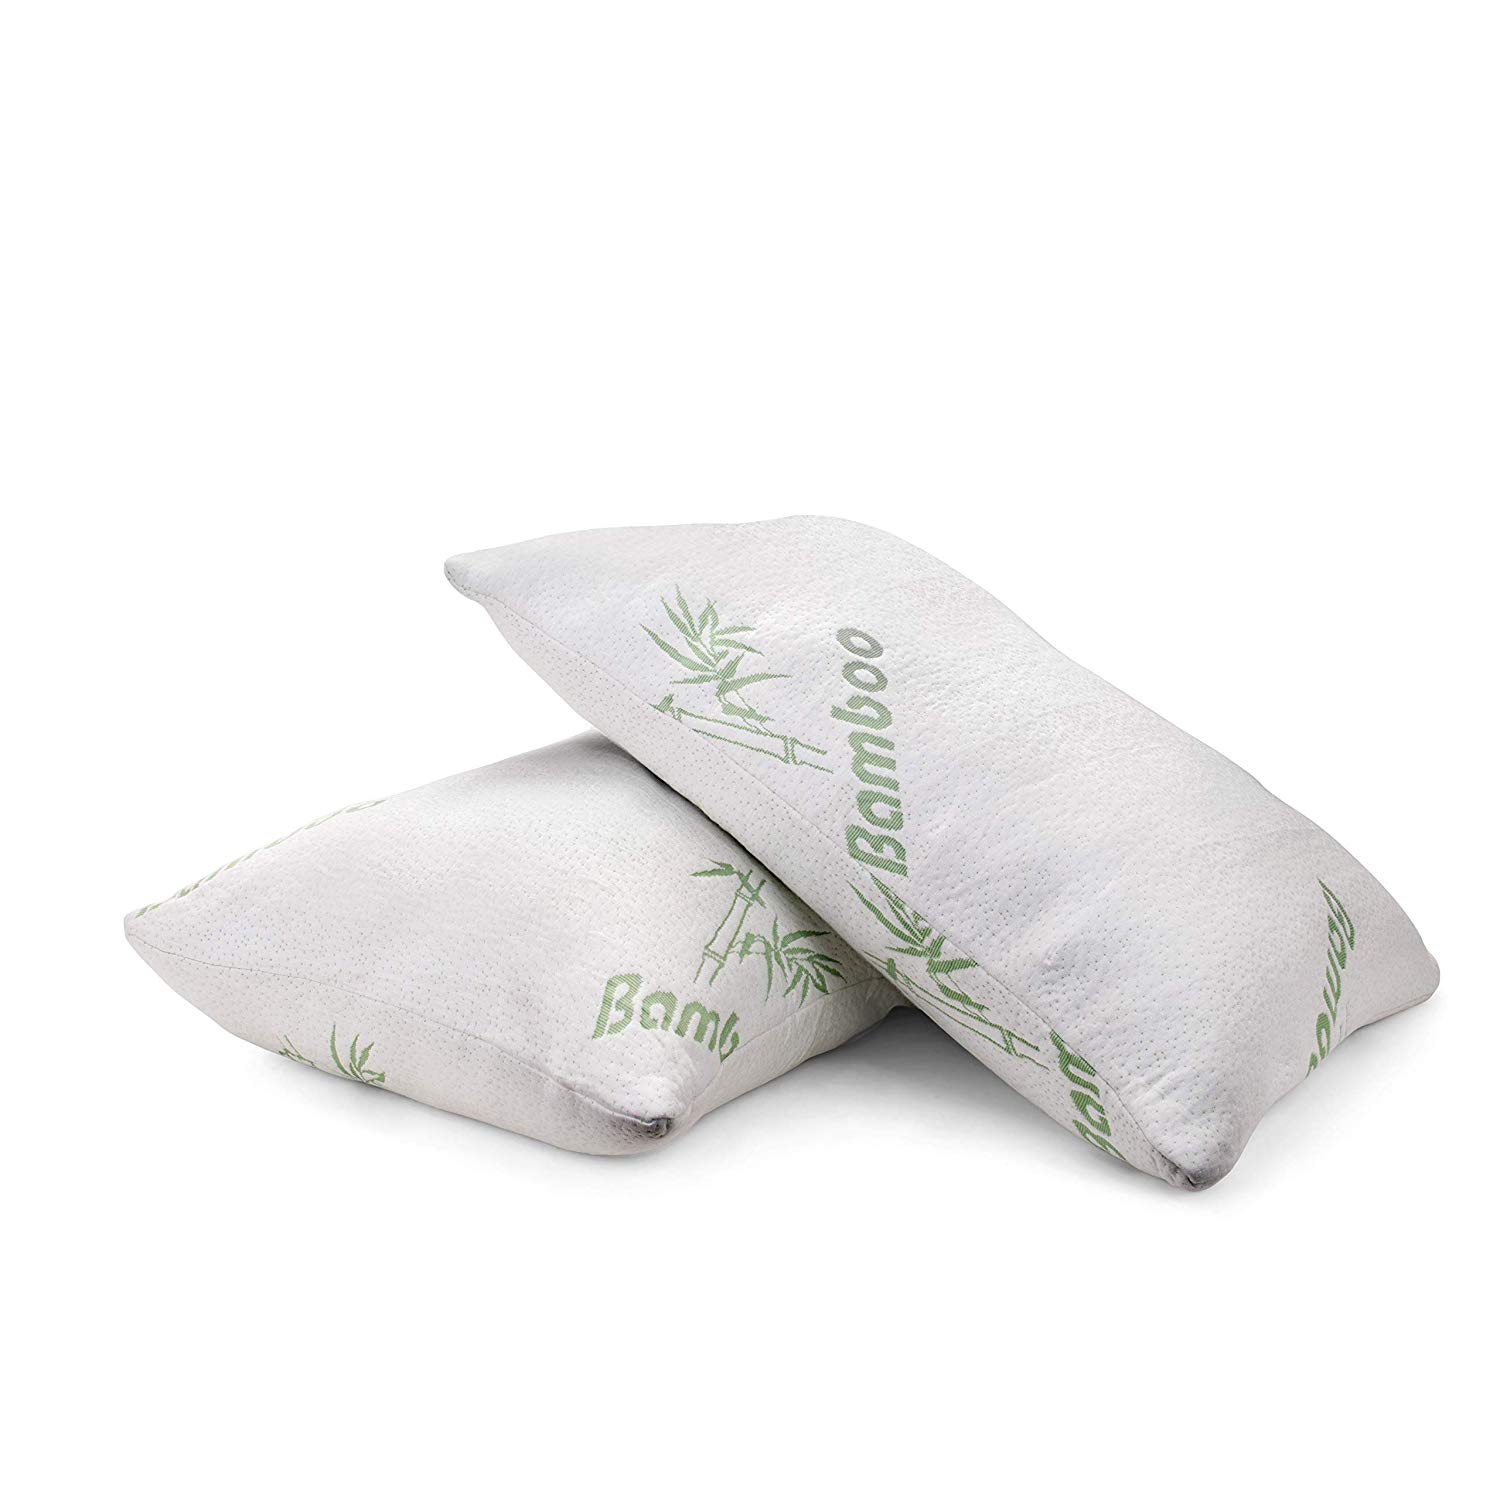 Read more about the article Plixio Pillows for Sleeping – 2 Pack Cooling Shredded Memory Foam Bed Pillows with Bamboo Hypoallergenic Covers